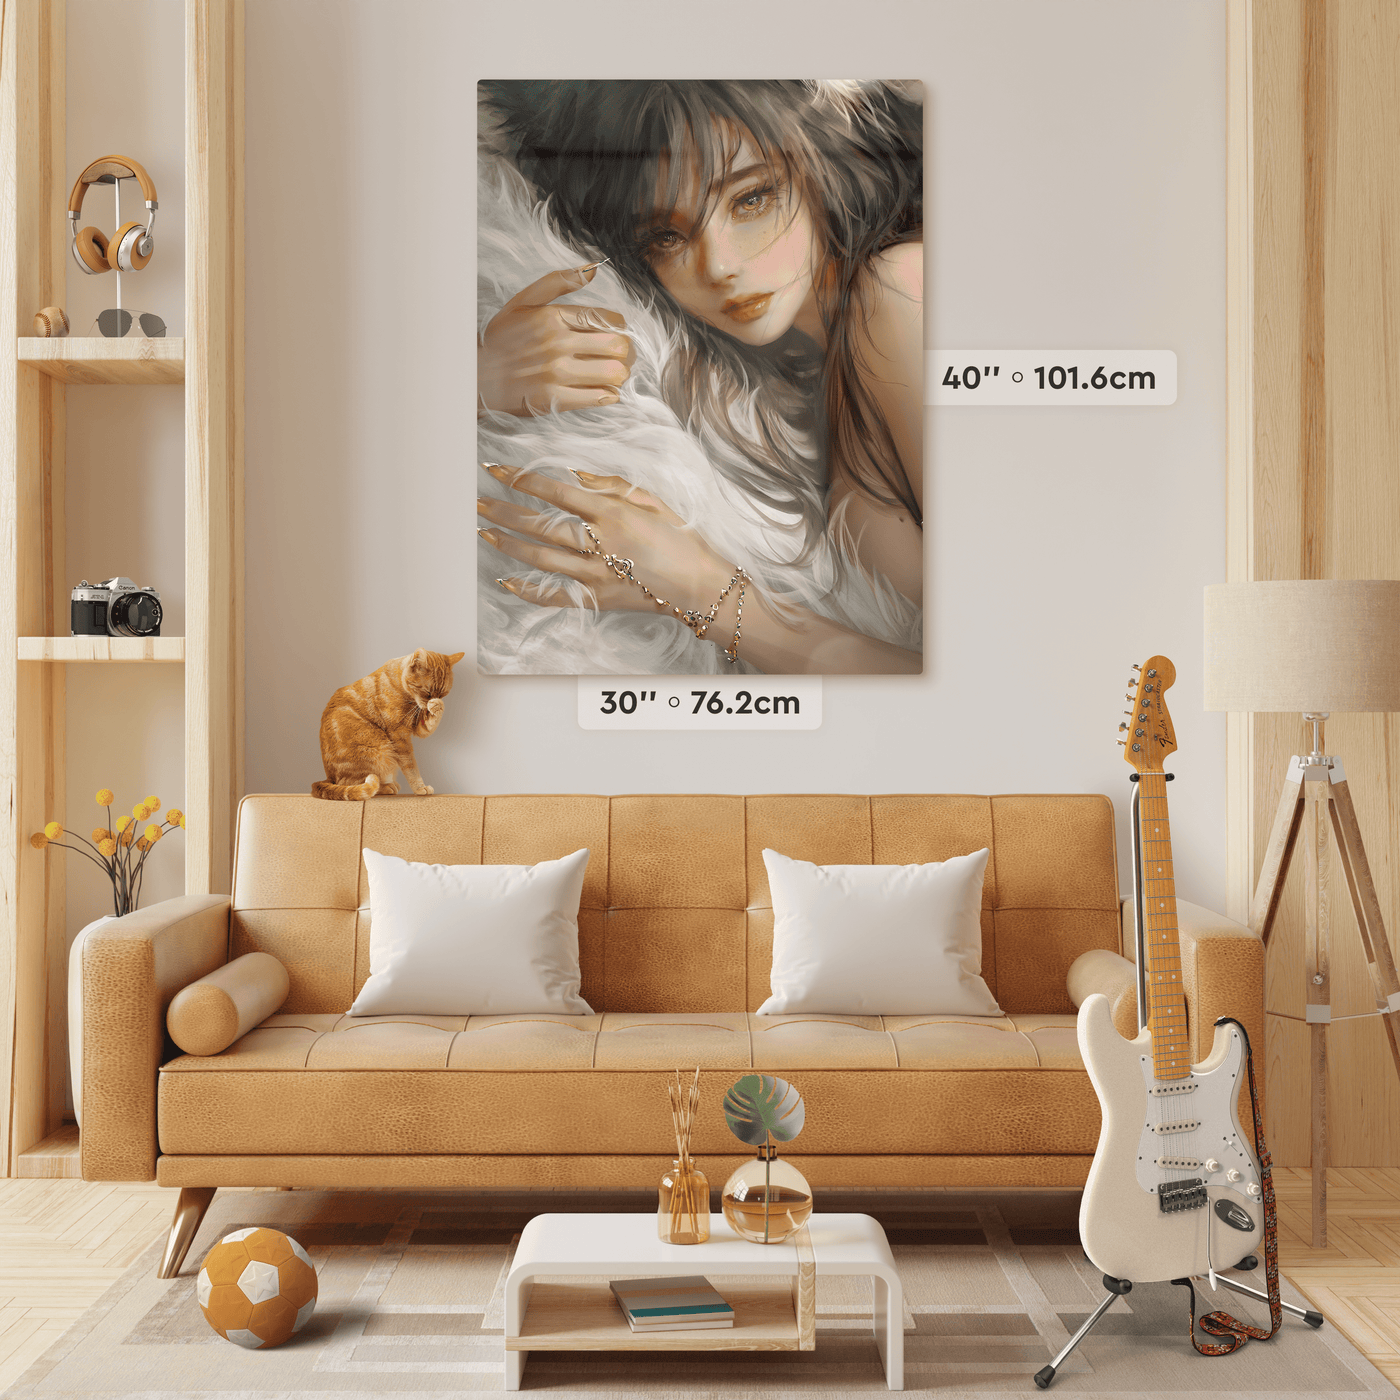 Large Custom Print on Metal 40''x30'' in size in living room interior.